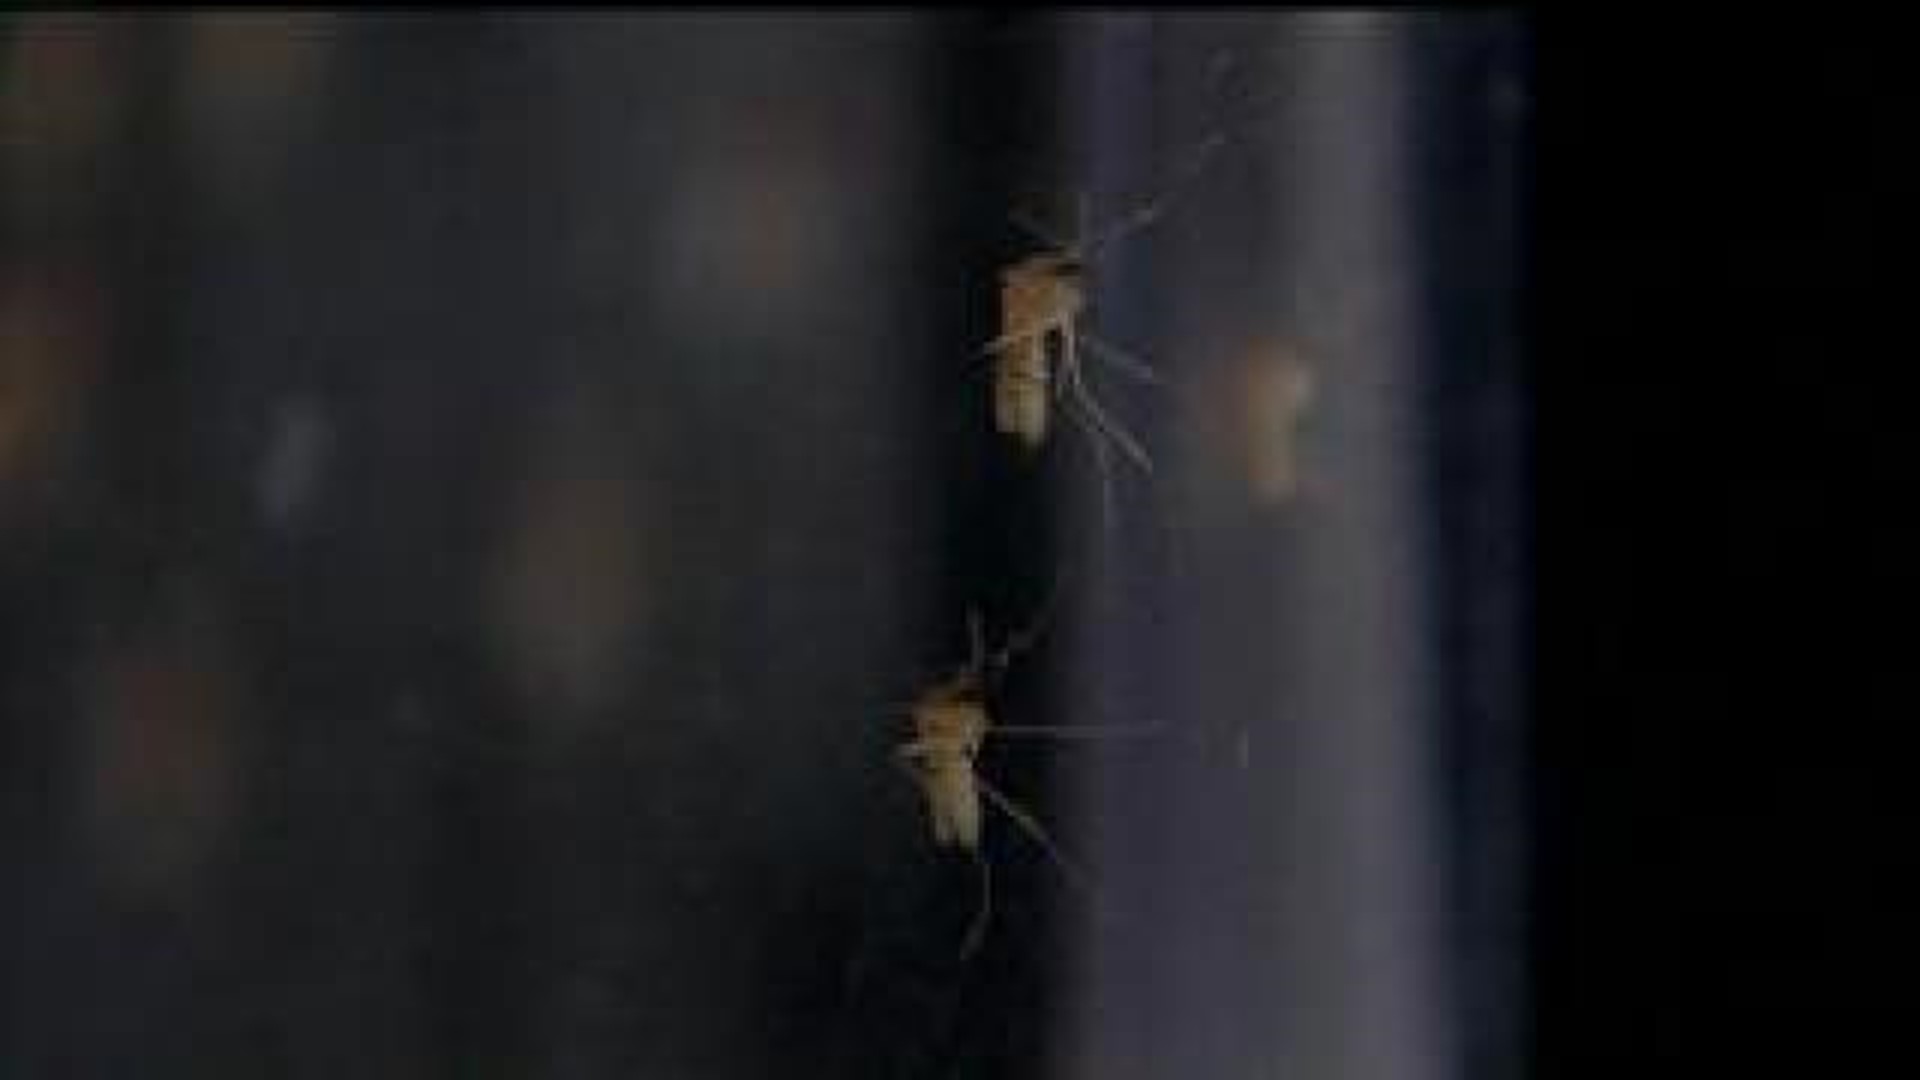 Horse tested positive for West Nile Virus